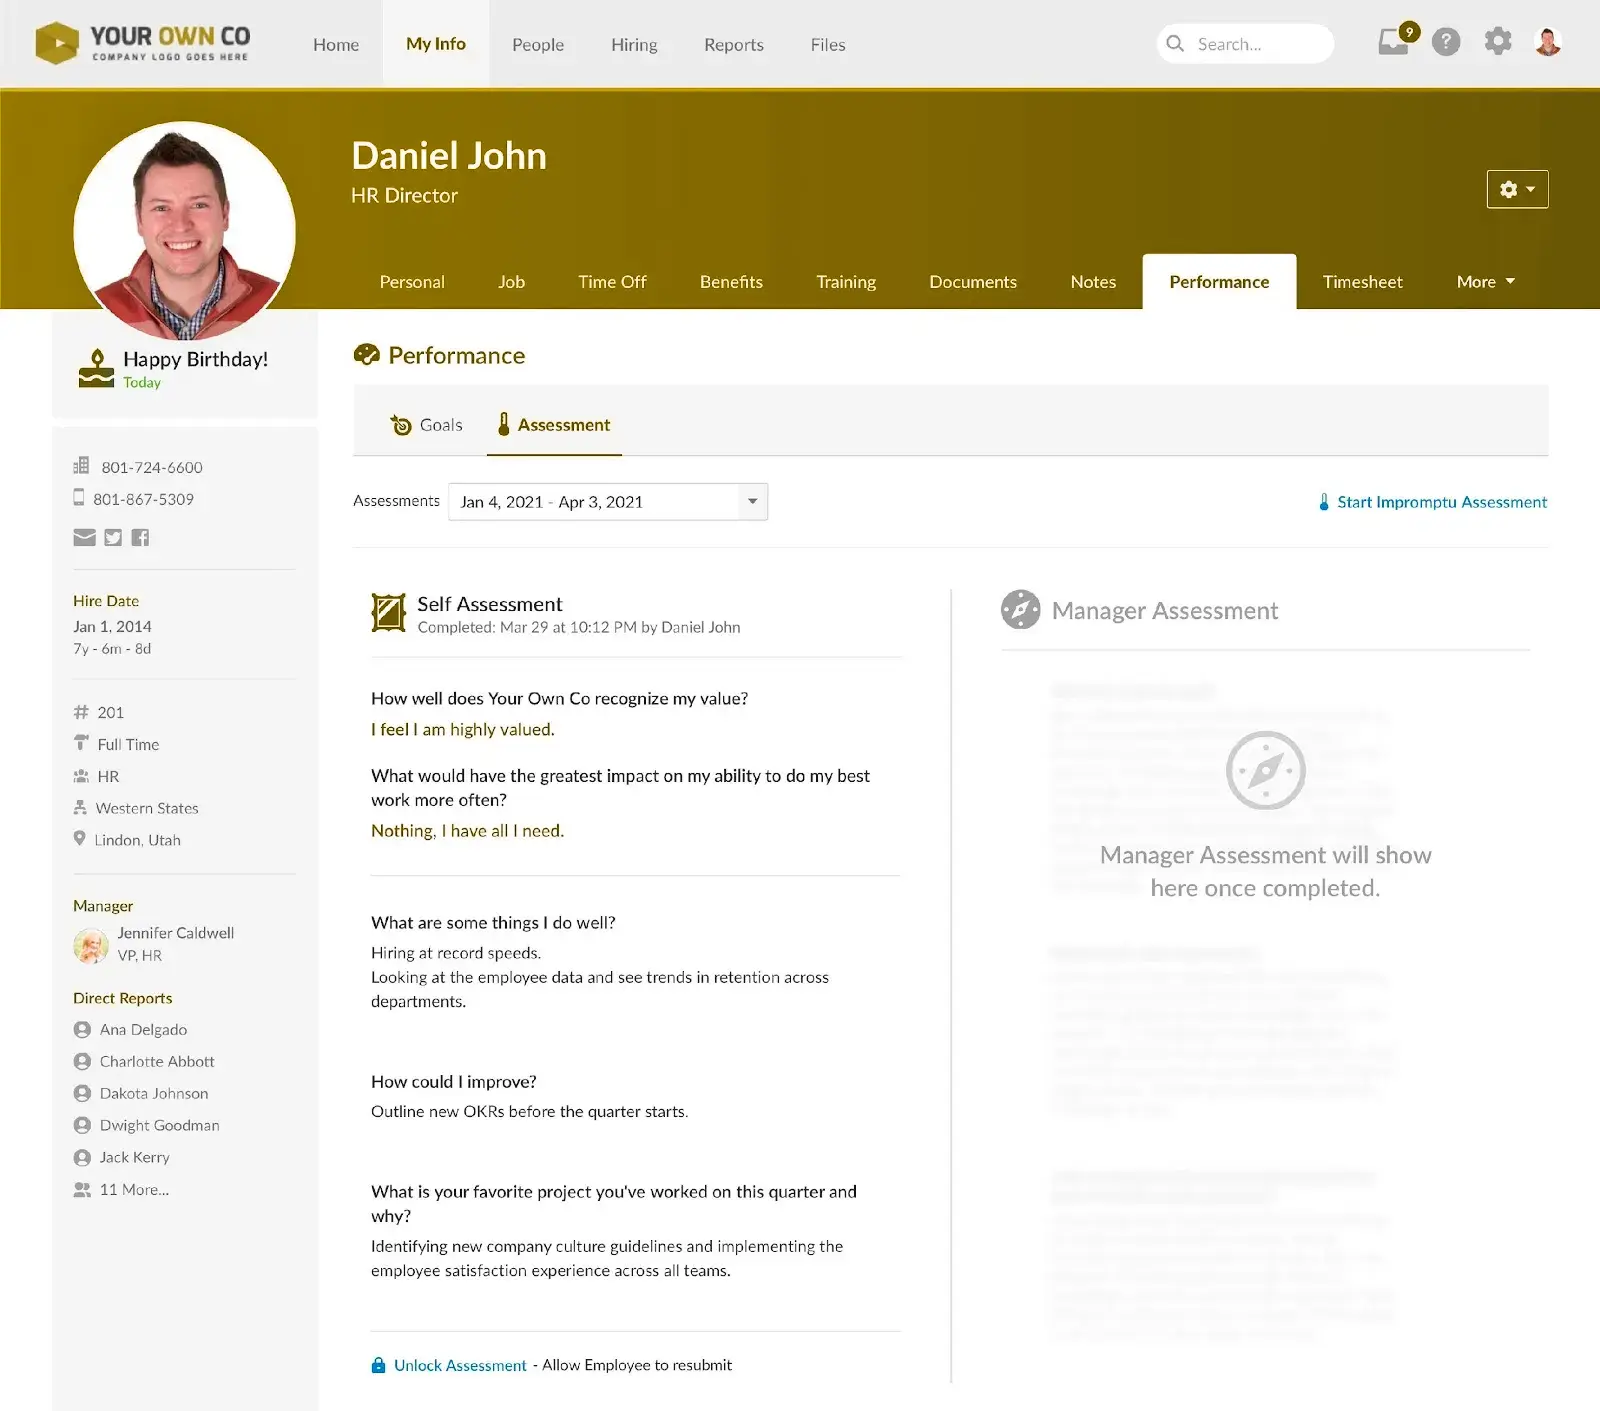 The BambooHR platform shows an employee's answers to their self-evaluation questions.